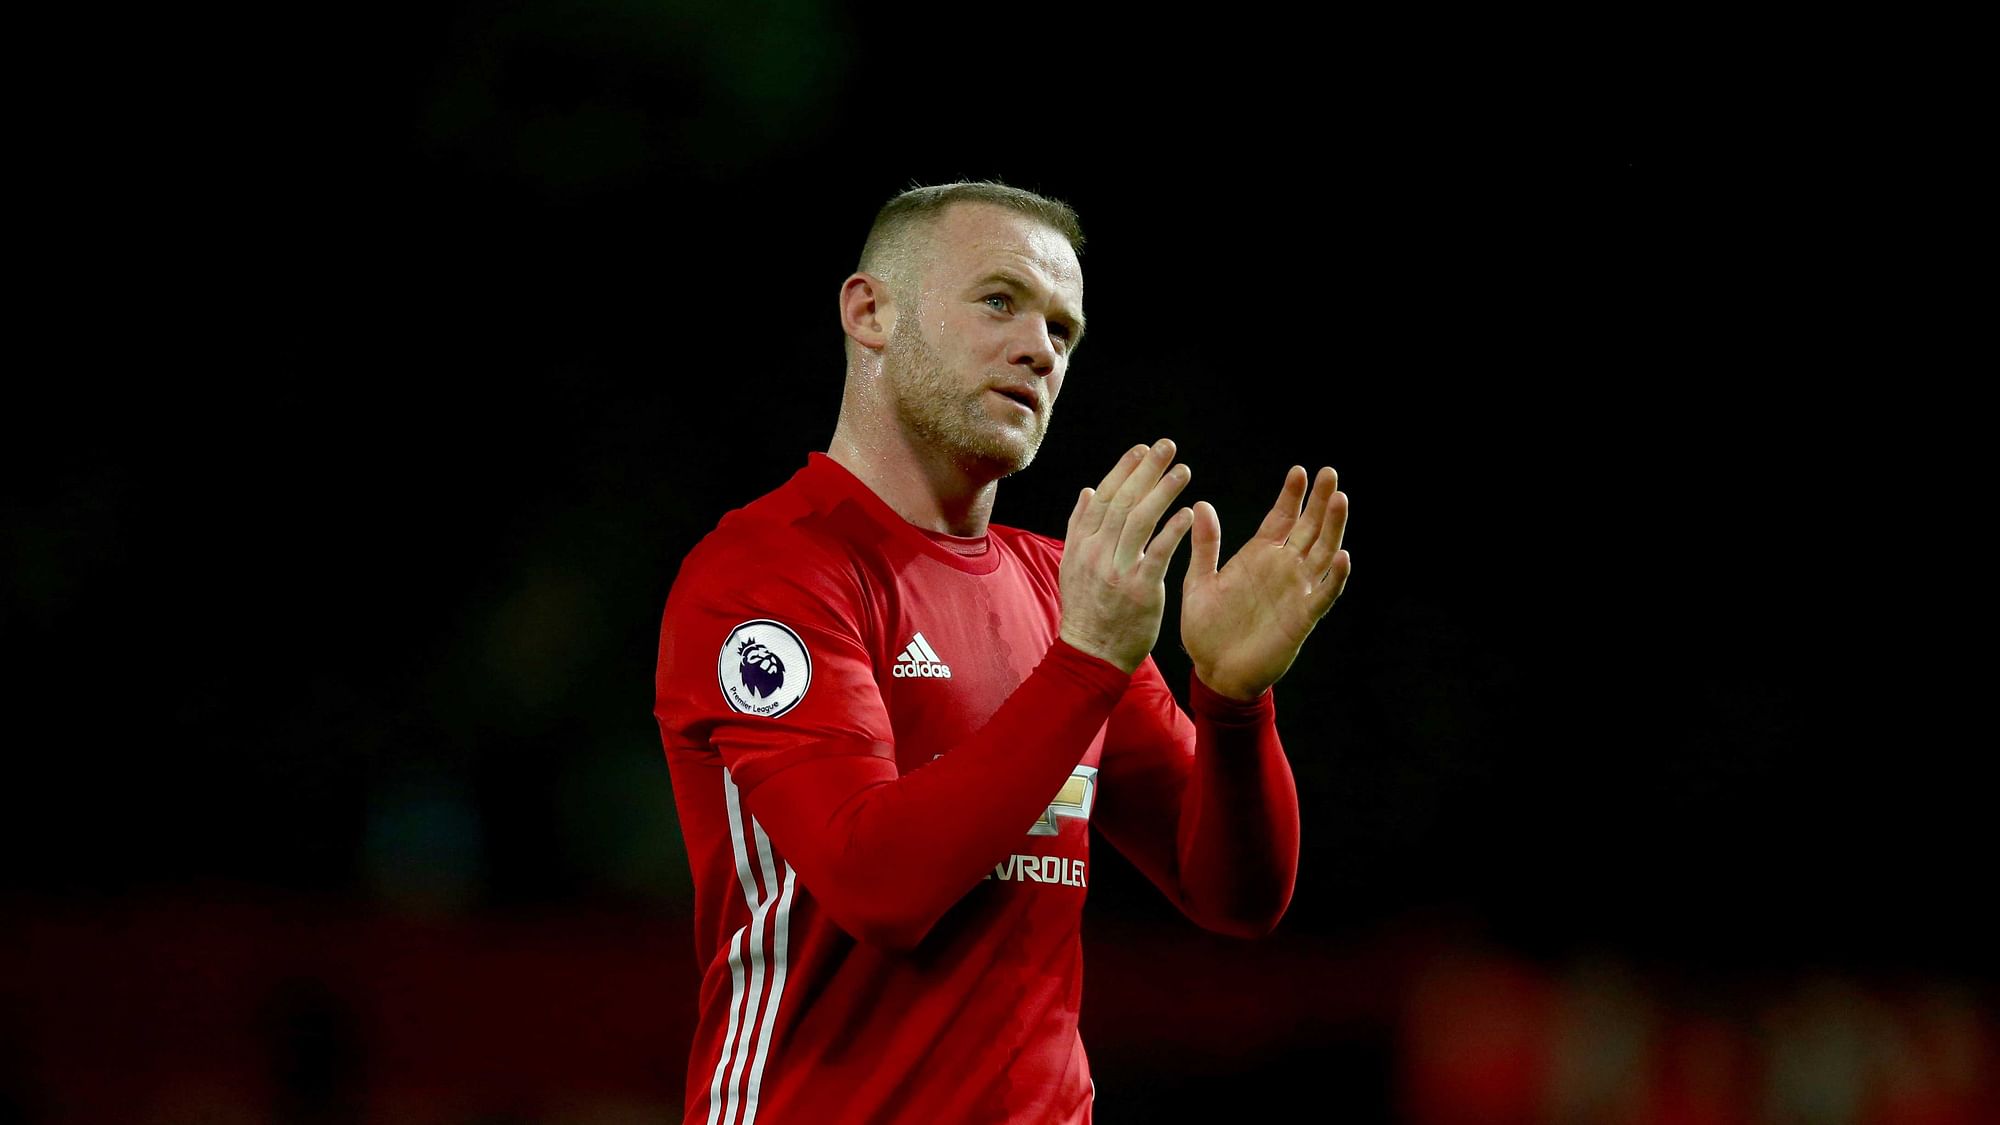 Manchester United’s Wayne Rooney leaves the field after the English Premier League soccer match between Manchester United and Liverpool at Old Trafford stadium in Manchester, England, Sunday, Jan. 15, 2017.&nbsp;